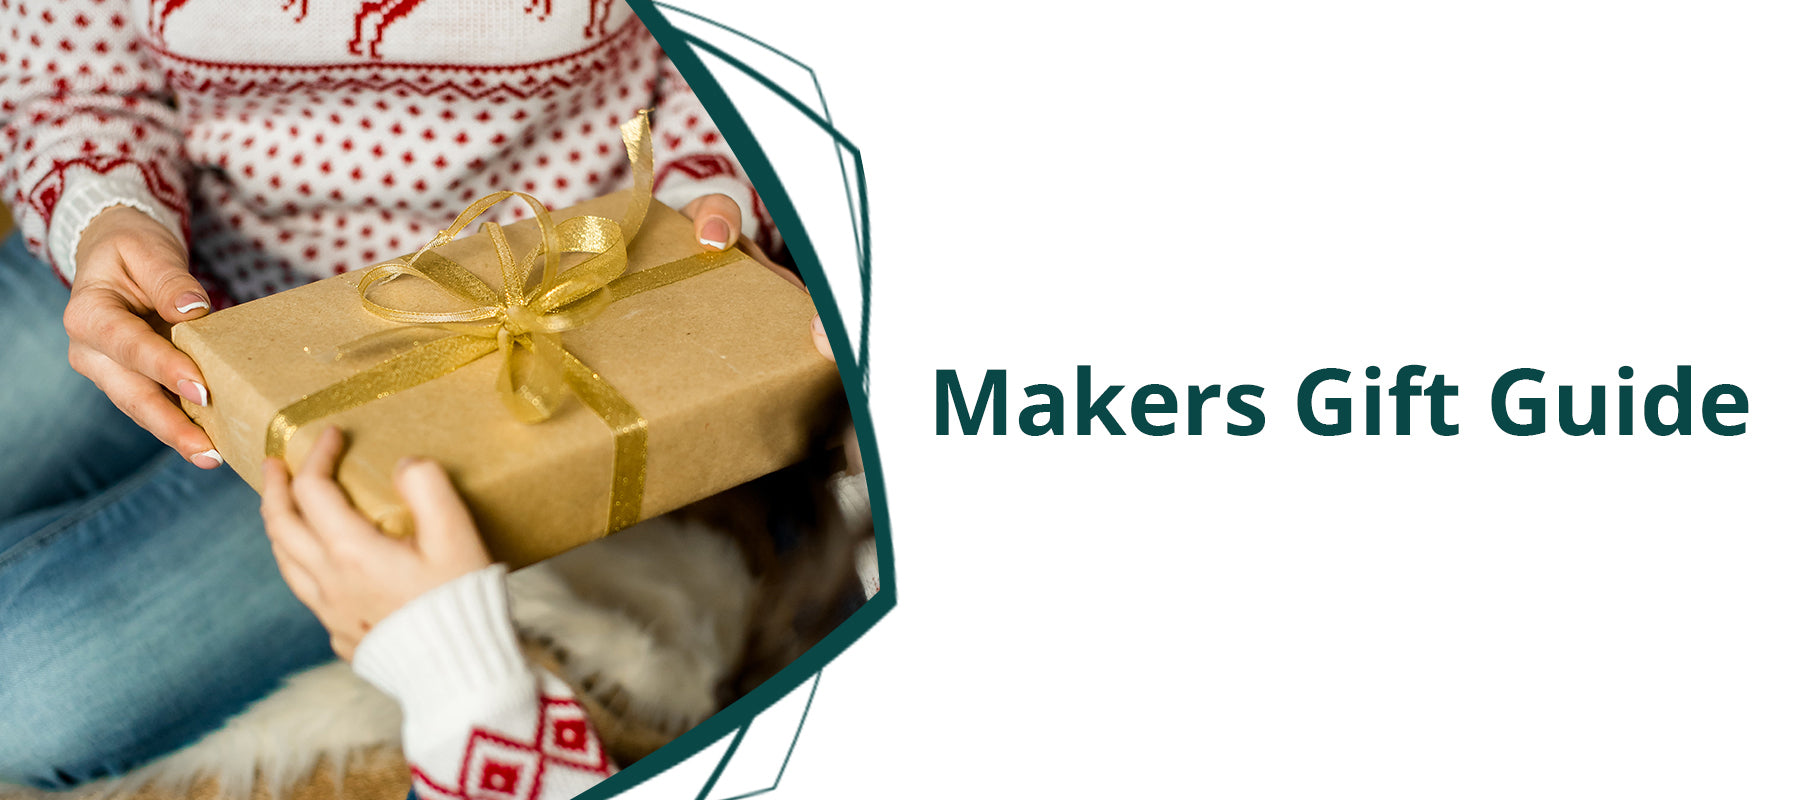 Makers Gift Guide